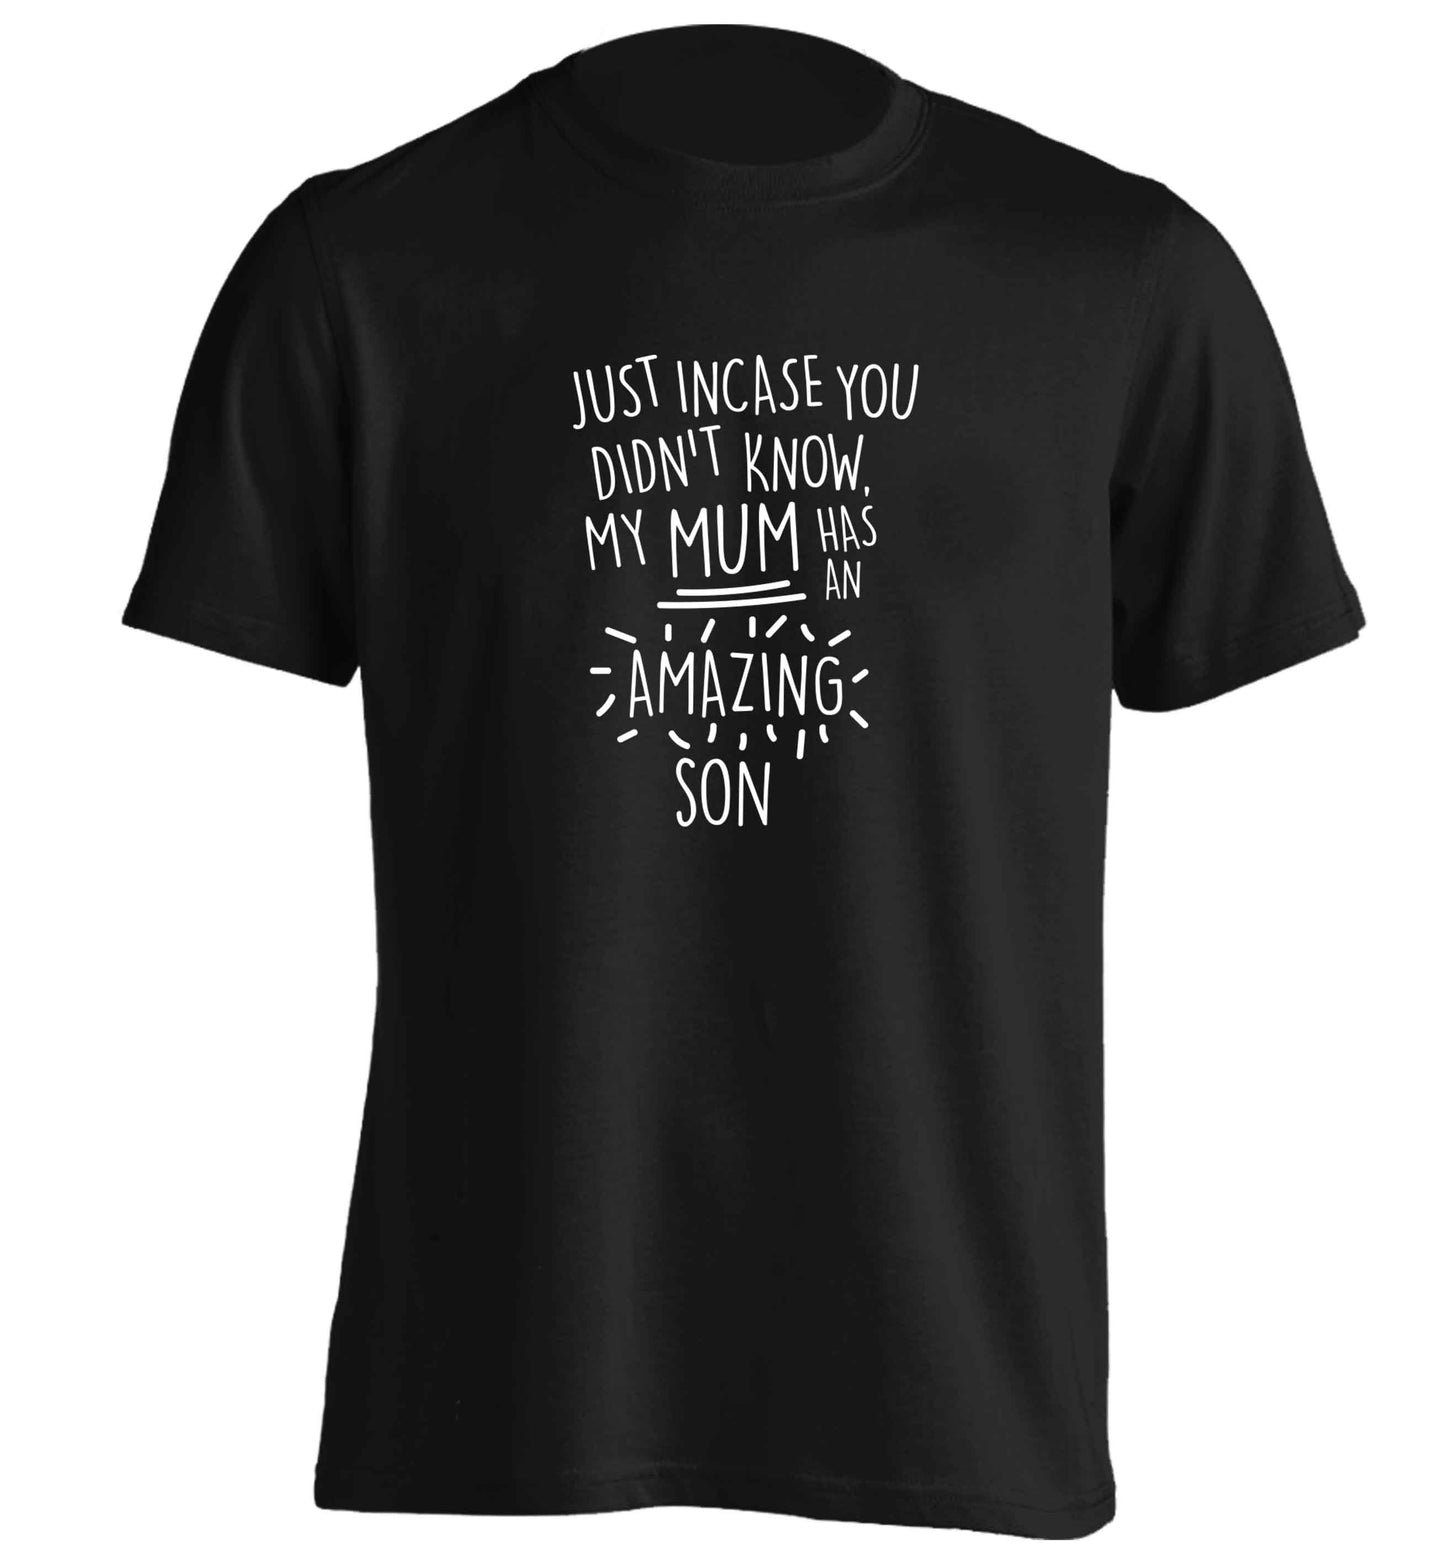 Just incase you didn't know my mum has an amazing son adults unisex black Tshirt 2XL